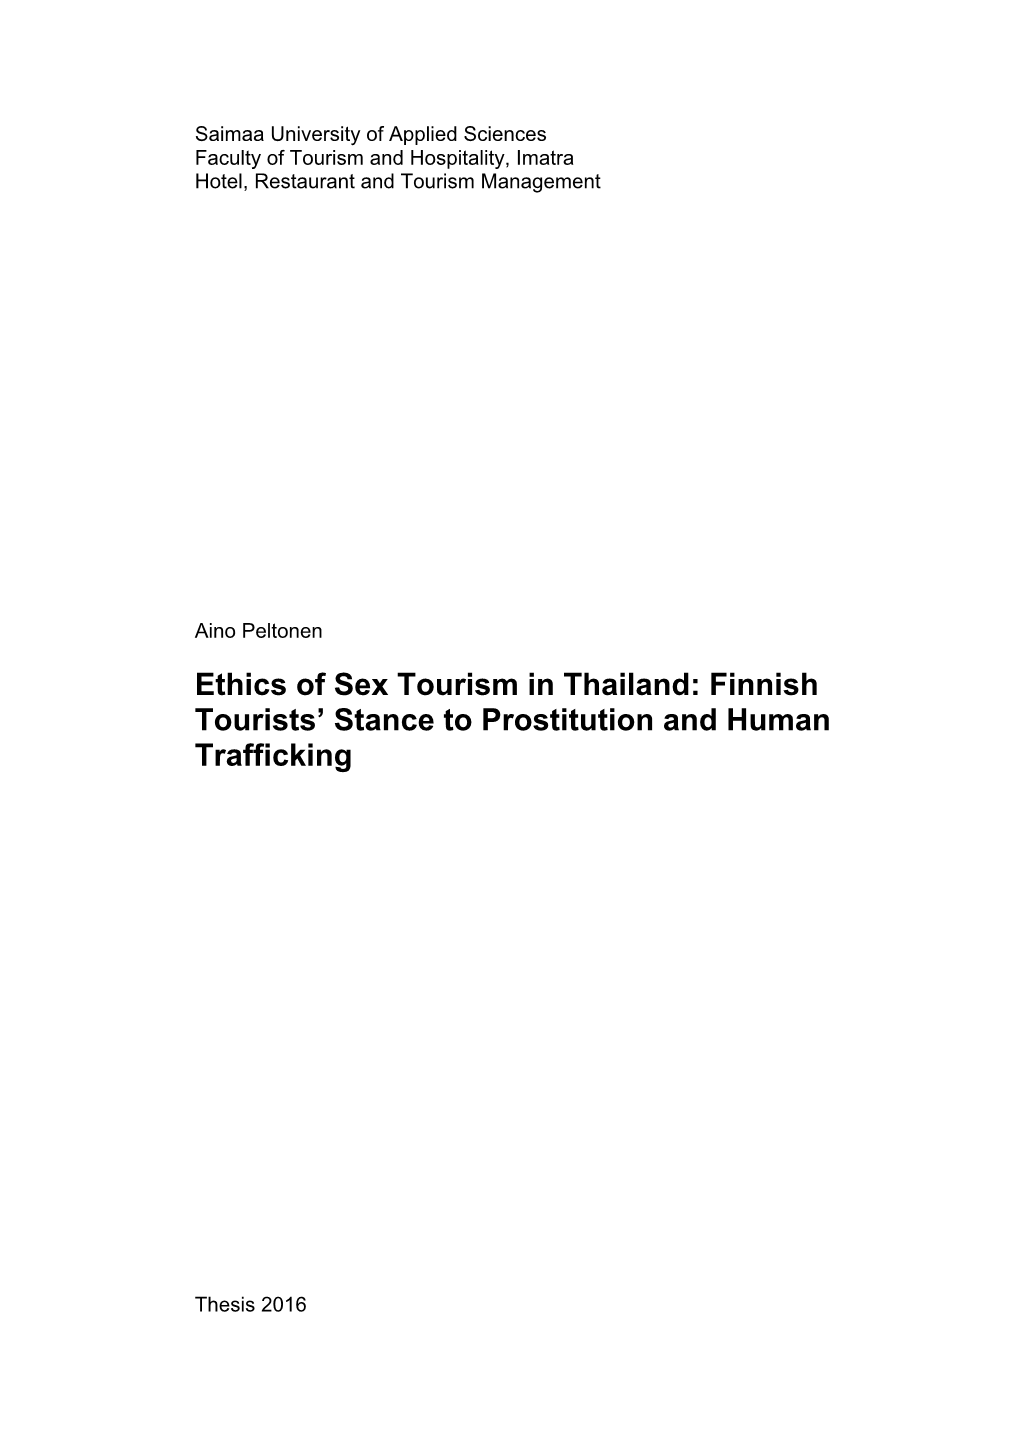 Ethics of Sex Tourism in Thailand: Finnish Tourists' Stance